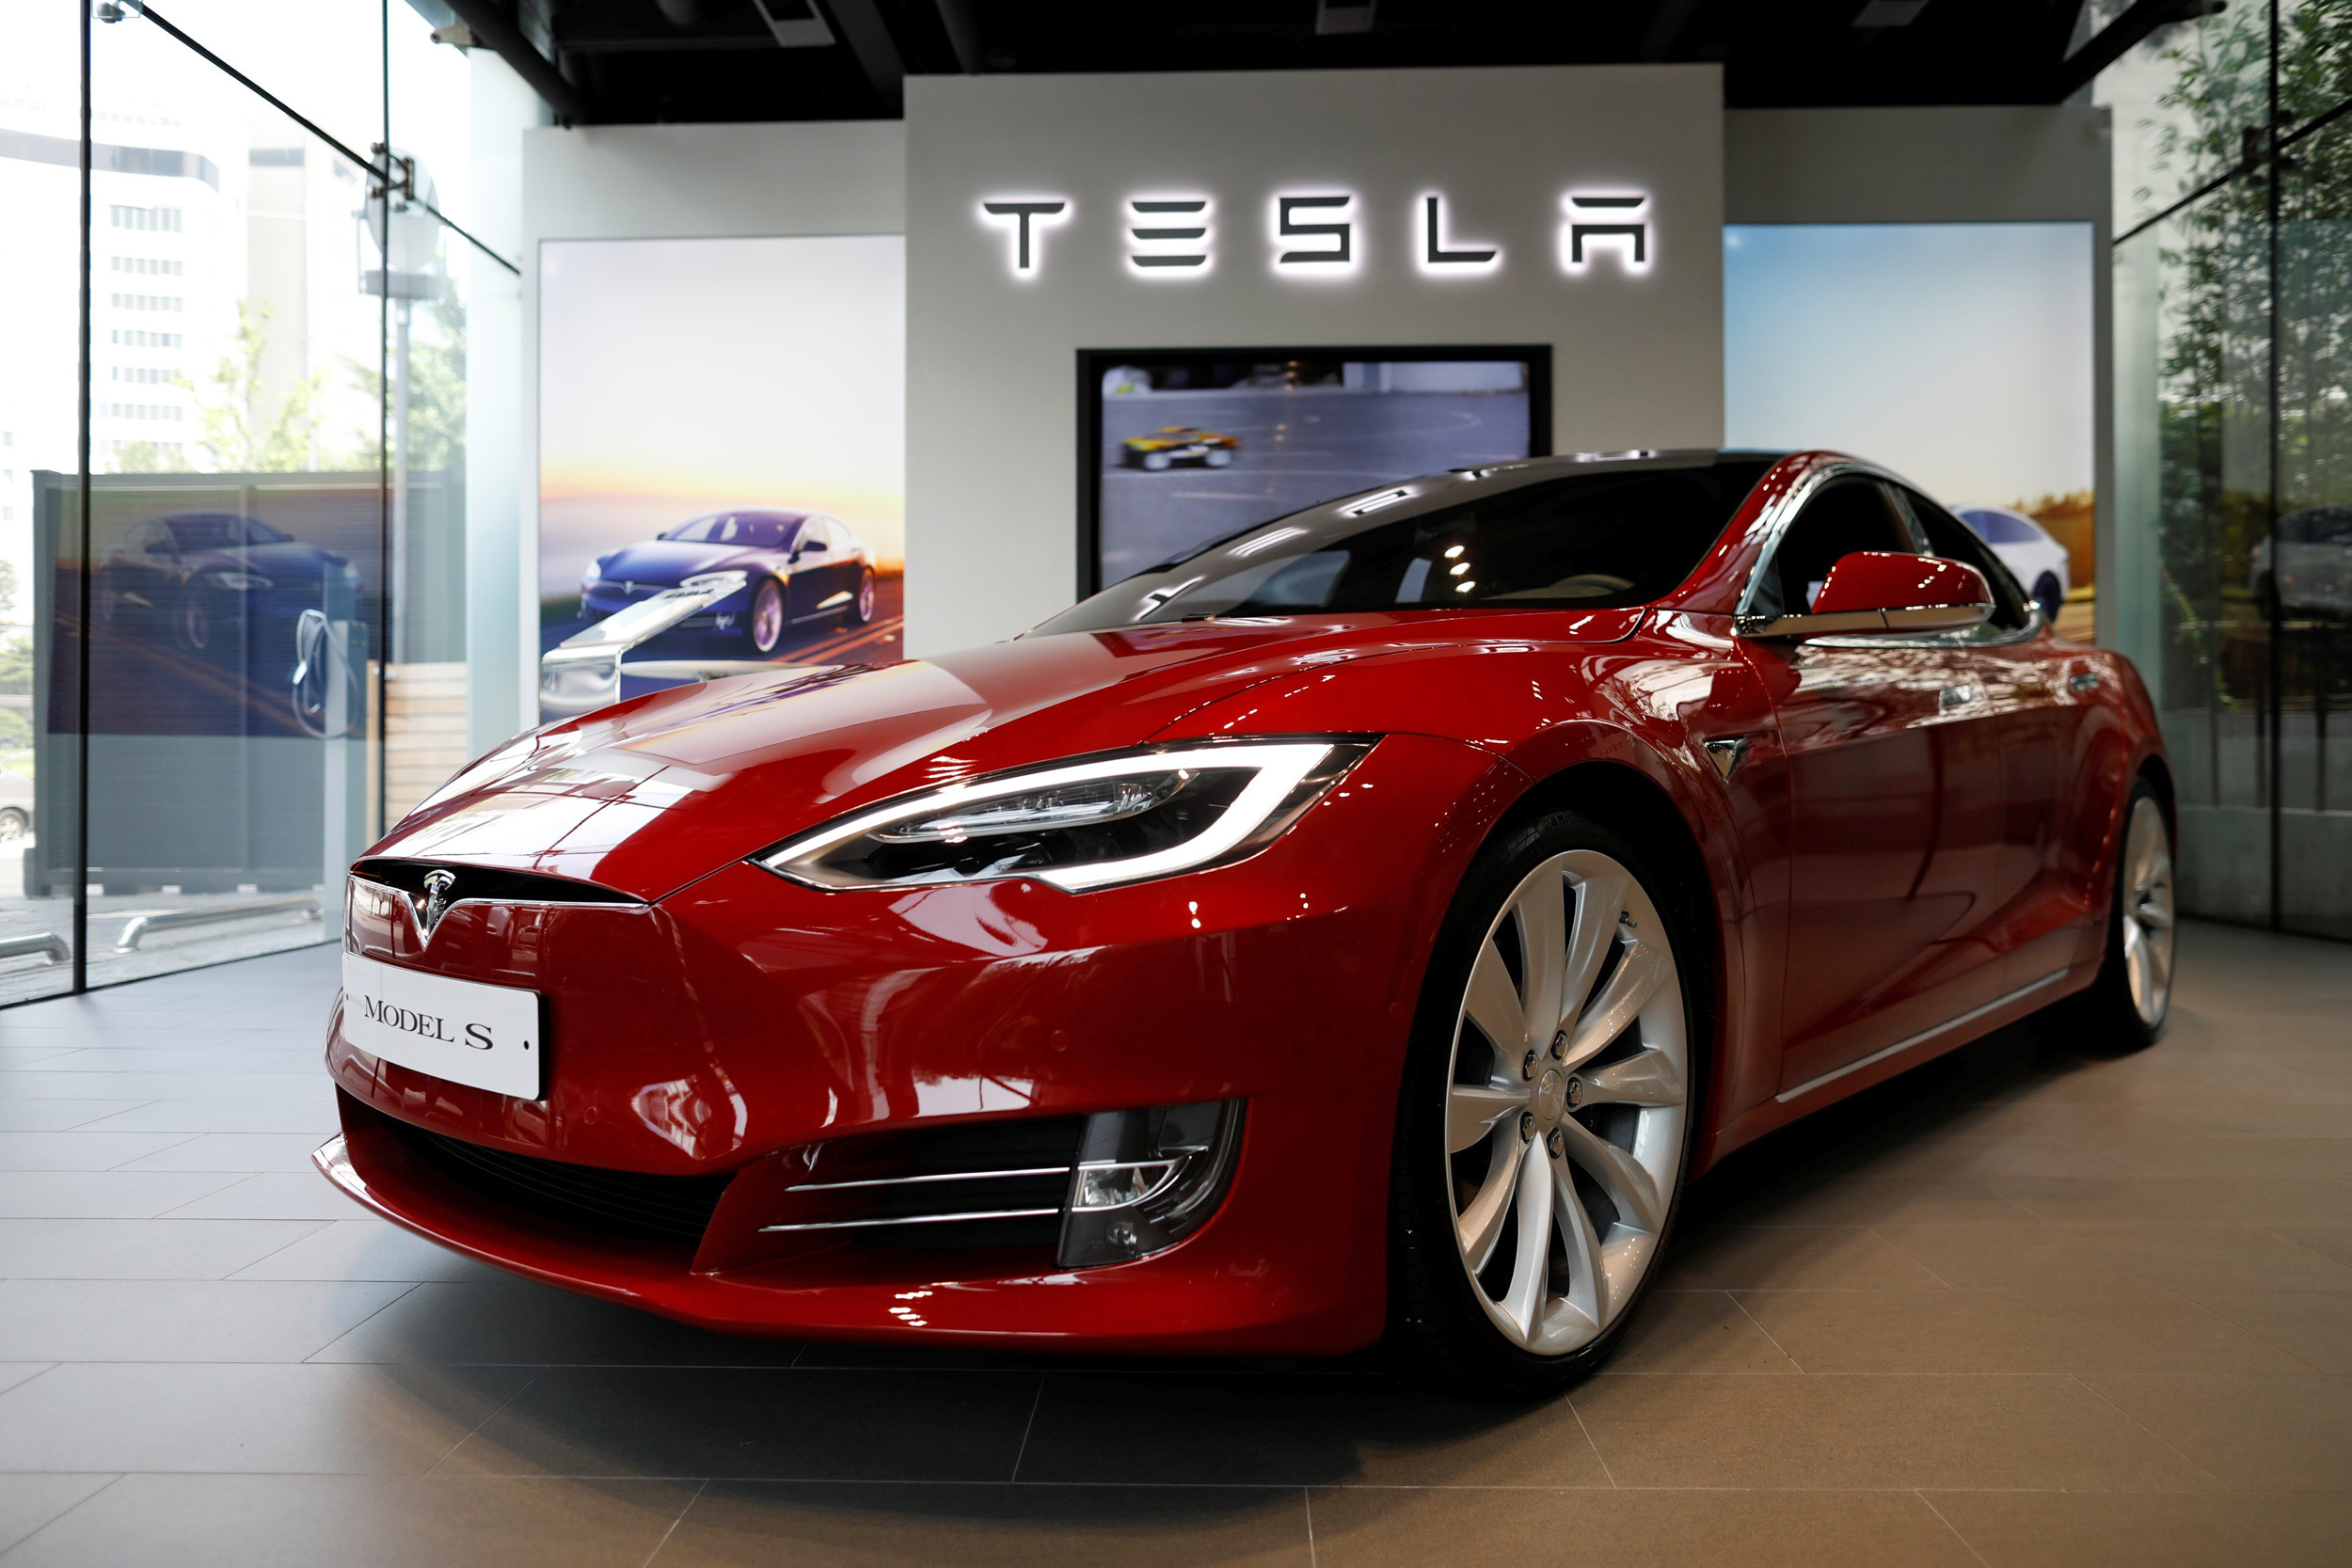 Electric Vehicle Price Battles - Can Tesla Emerge as the Automotive Industry’s Amazon?